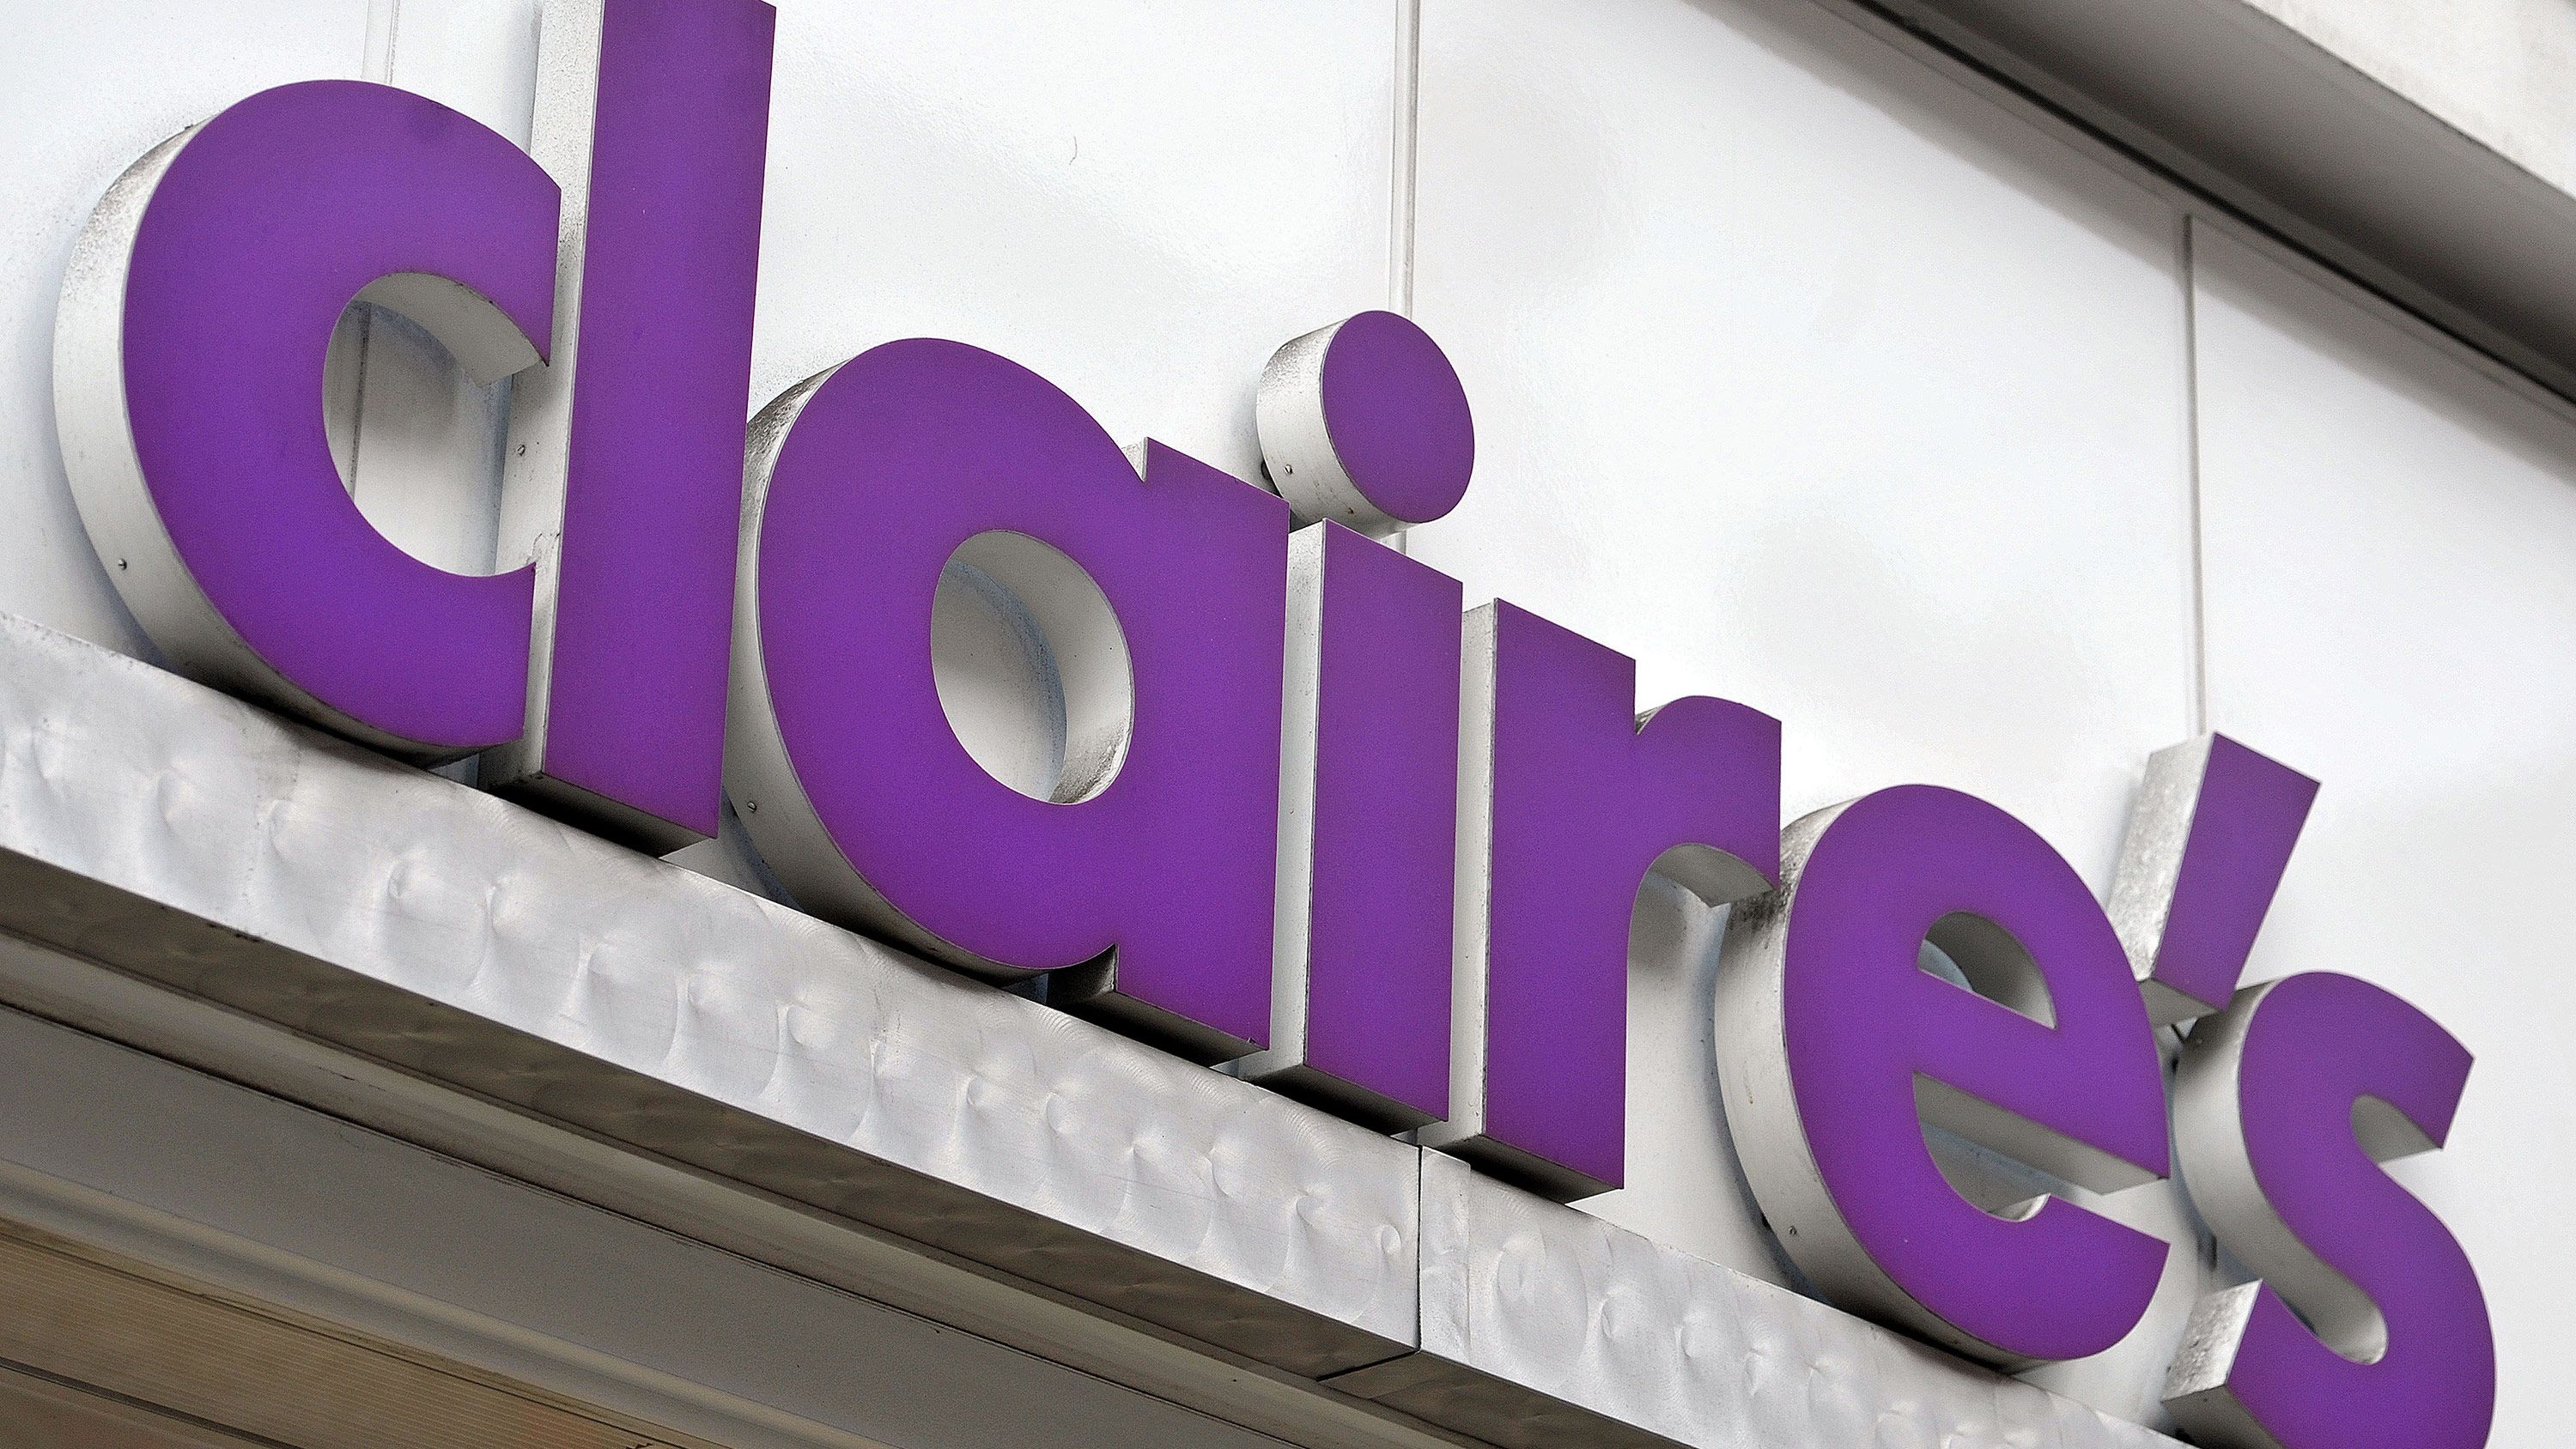 F.D.A. Confirms Asbestos in Claire's Products and Calls for Stronger  Regulation - The New York Times